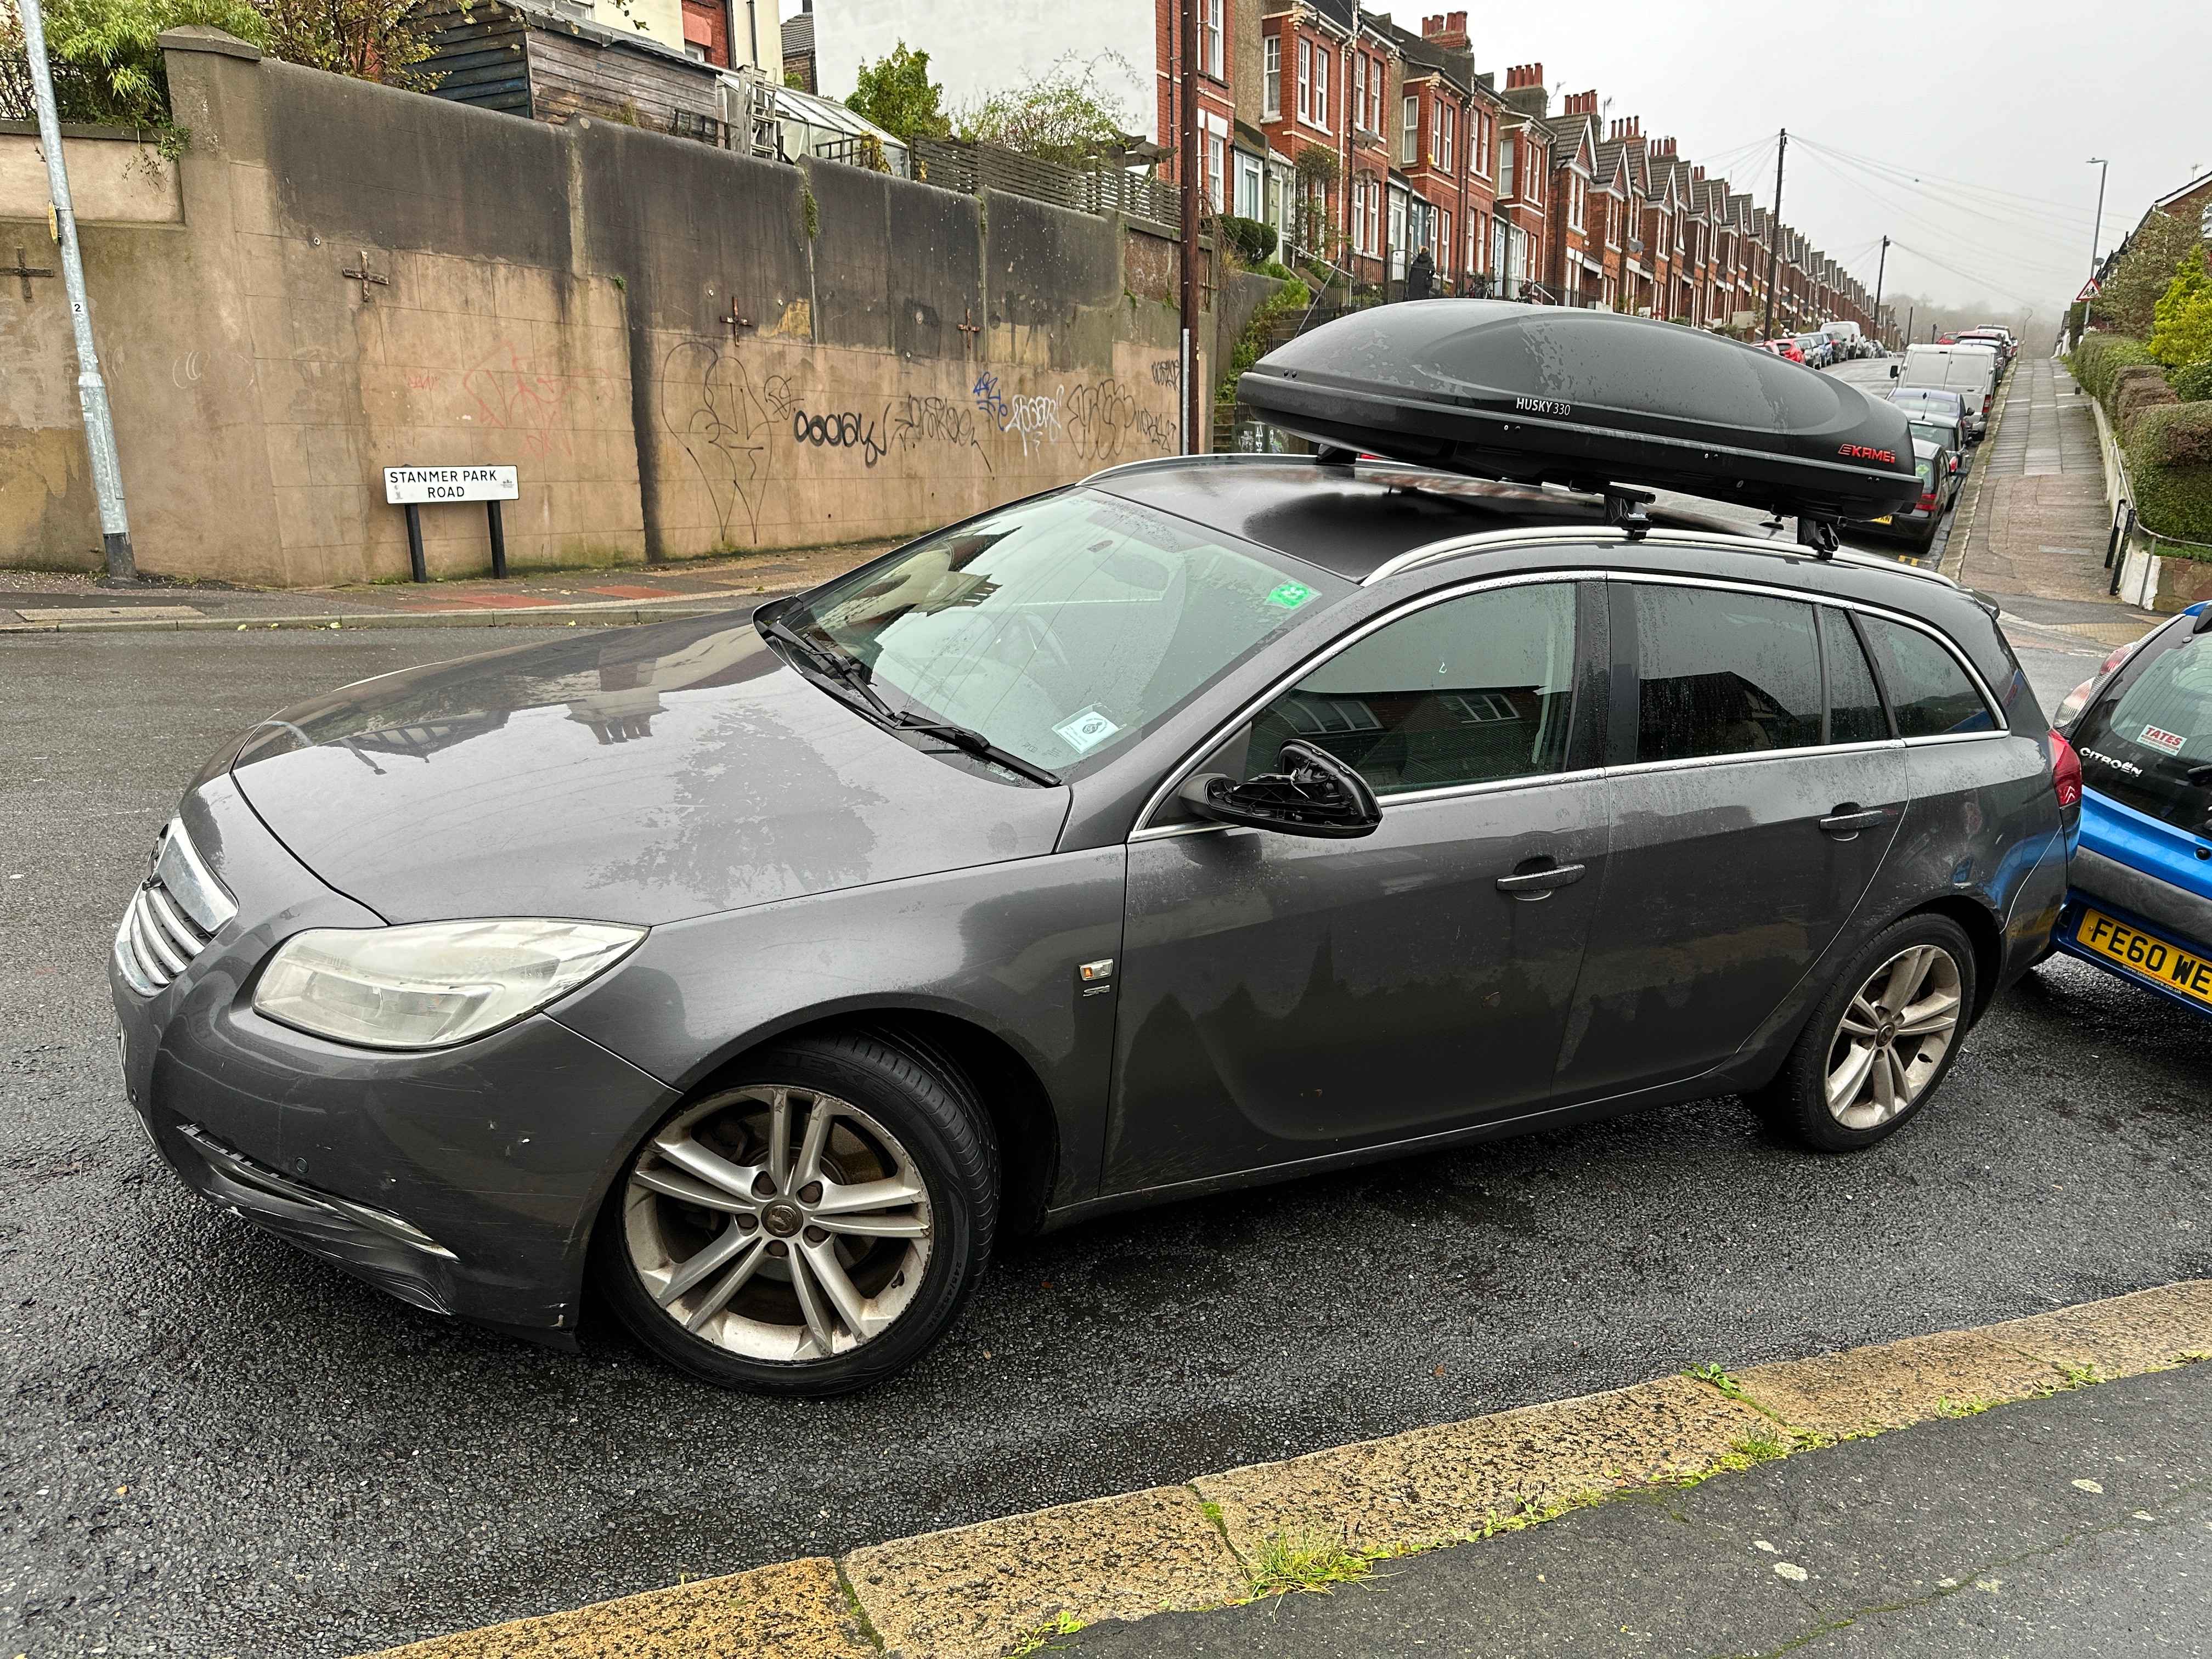 Photograph of DF60 DWZ - a Grey Vauxhall Insignia parked in Hollingdean by a non-resident. The fifth of nine photographs supplied by the residents of Hollingdean.